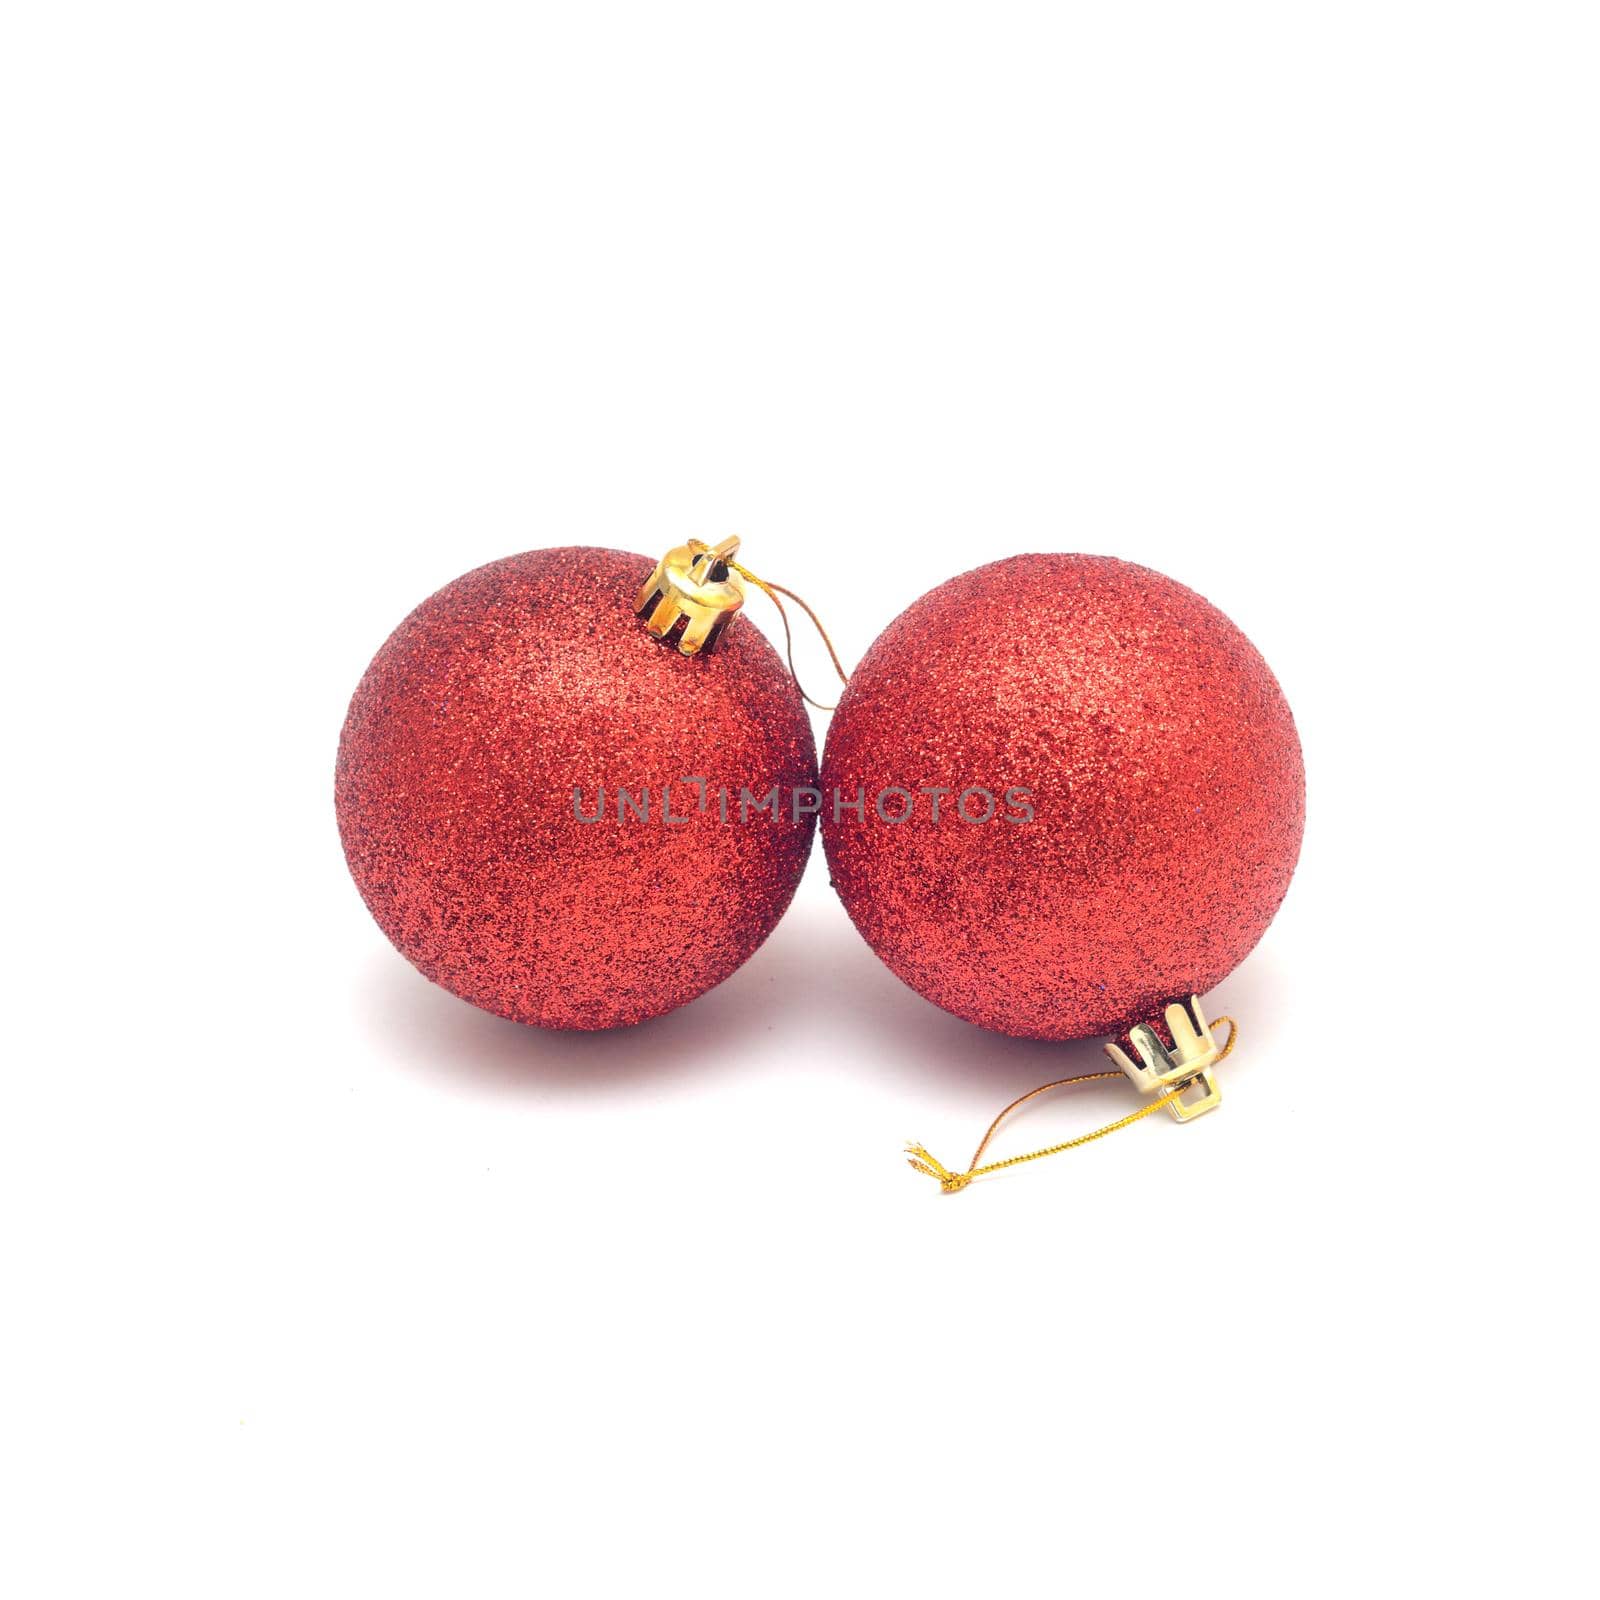 Two red Christmas balls isolated on a white background. by andre_dechapelle